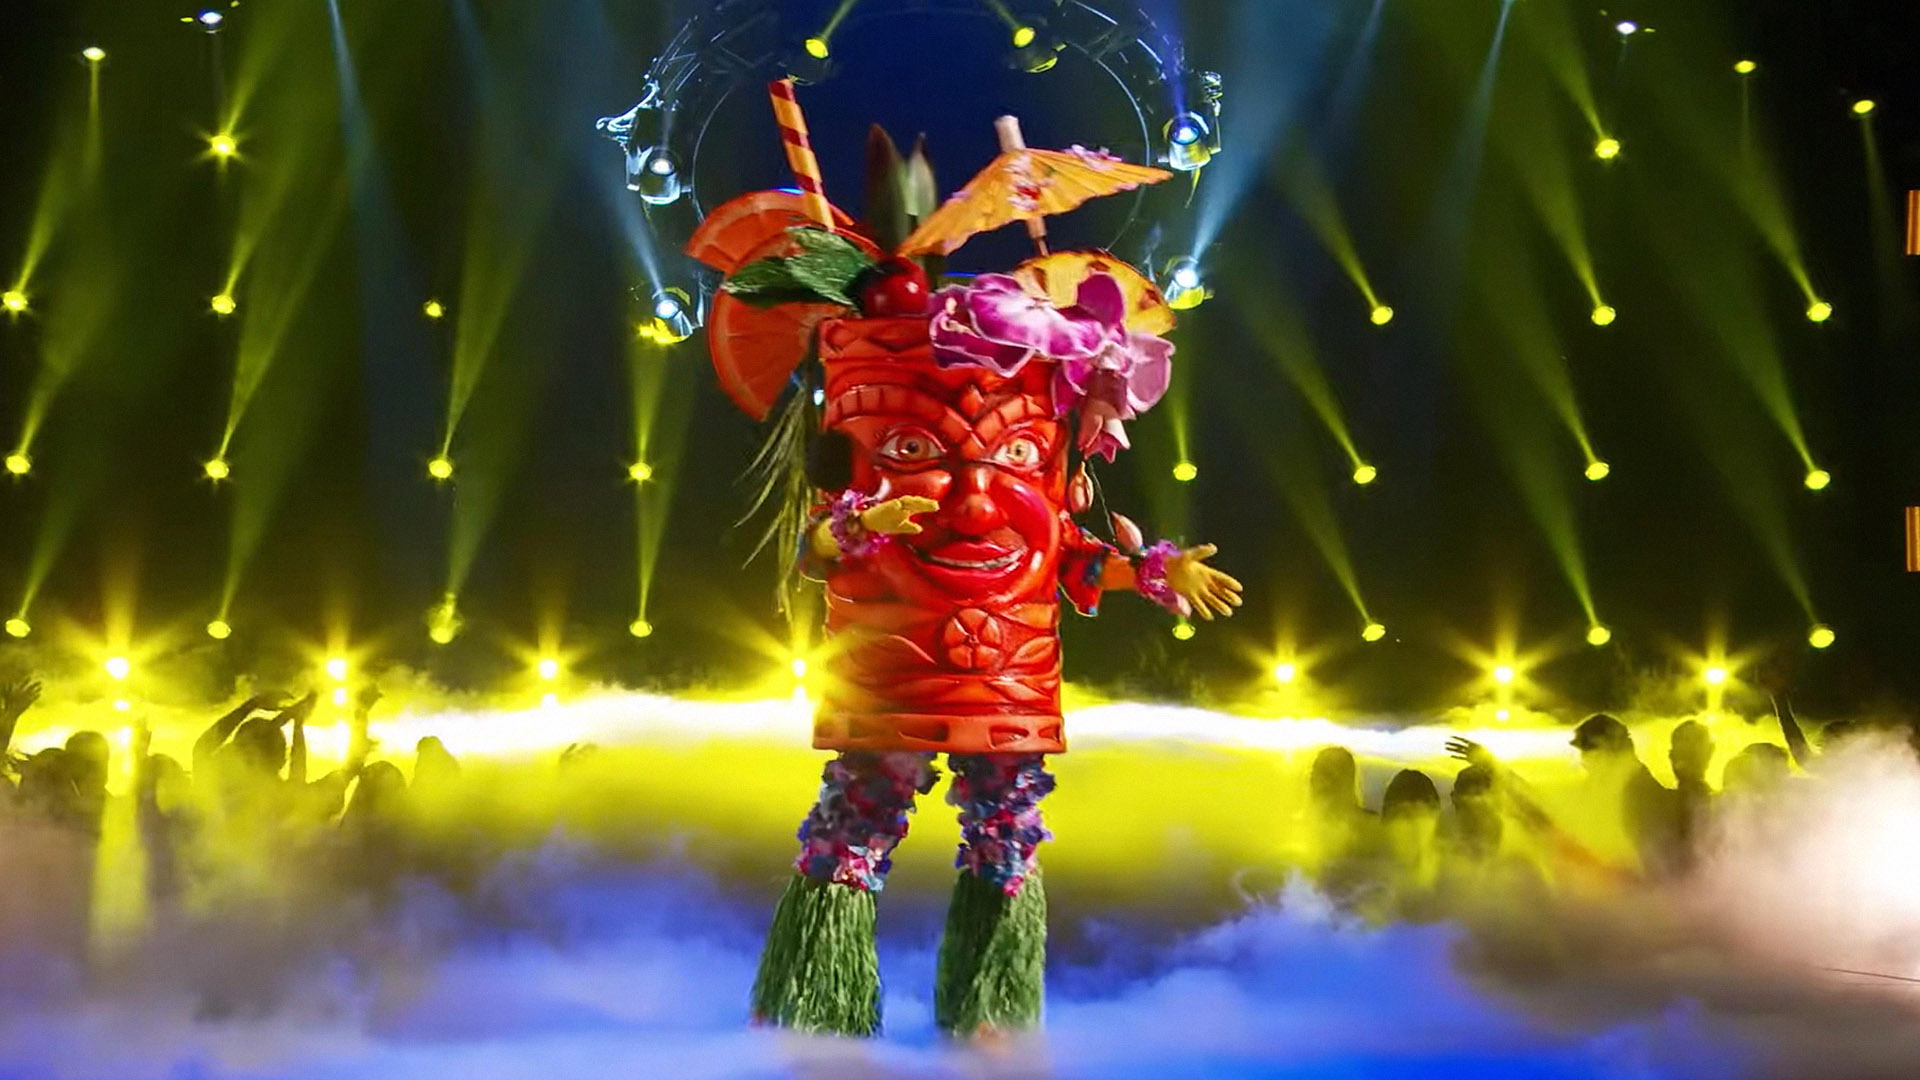 5 Major Clues About Tiki's Identity in The Masked Singer Season 10